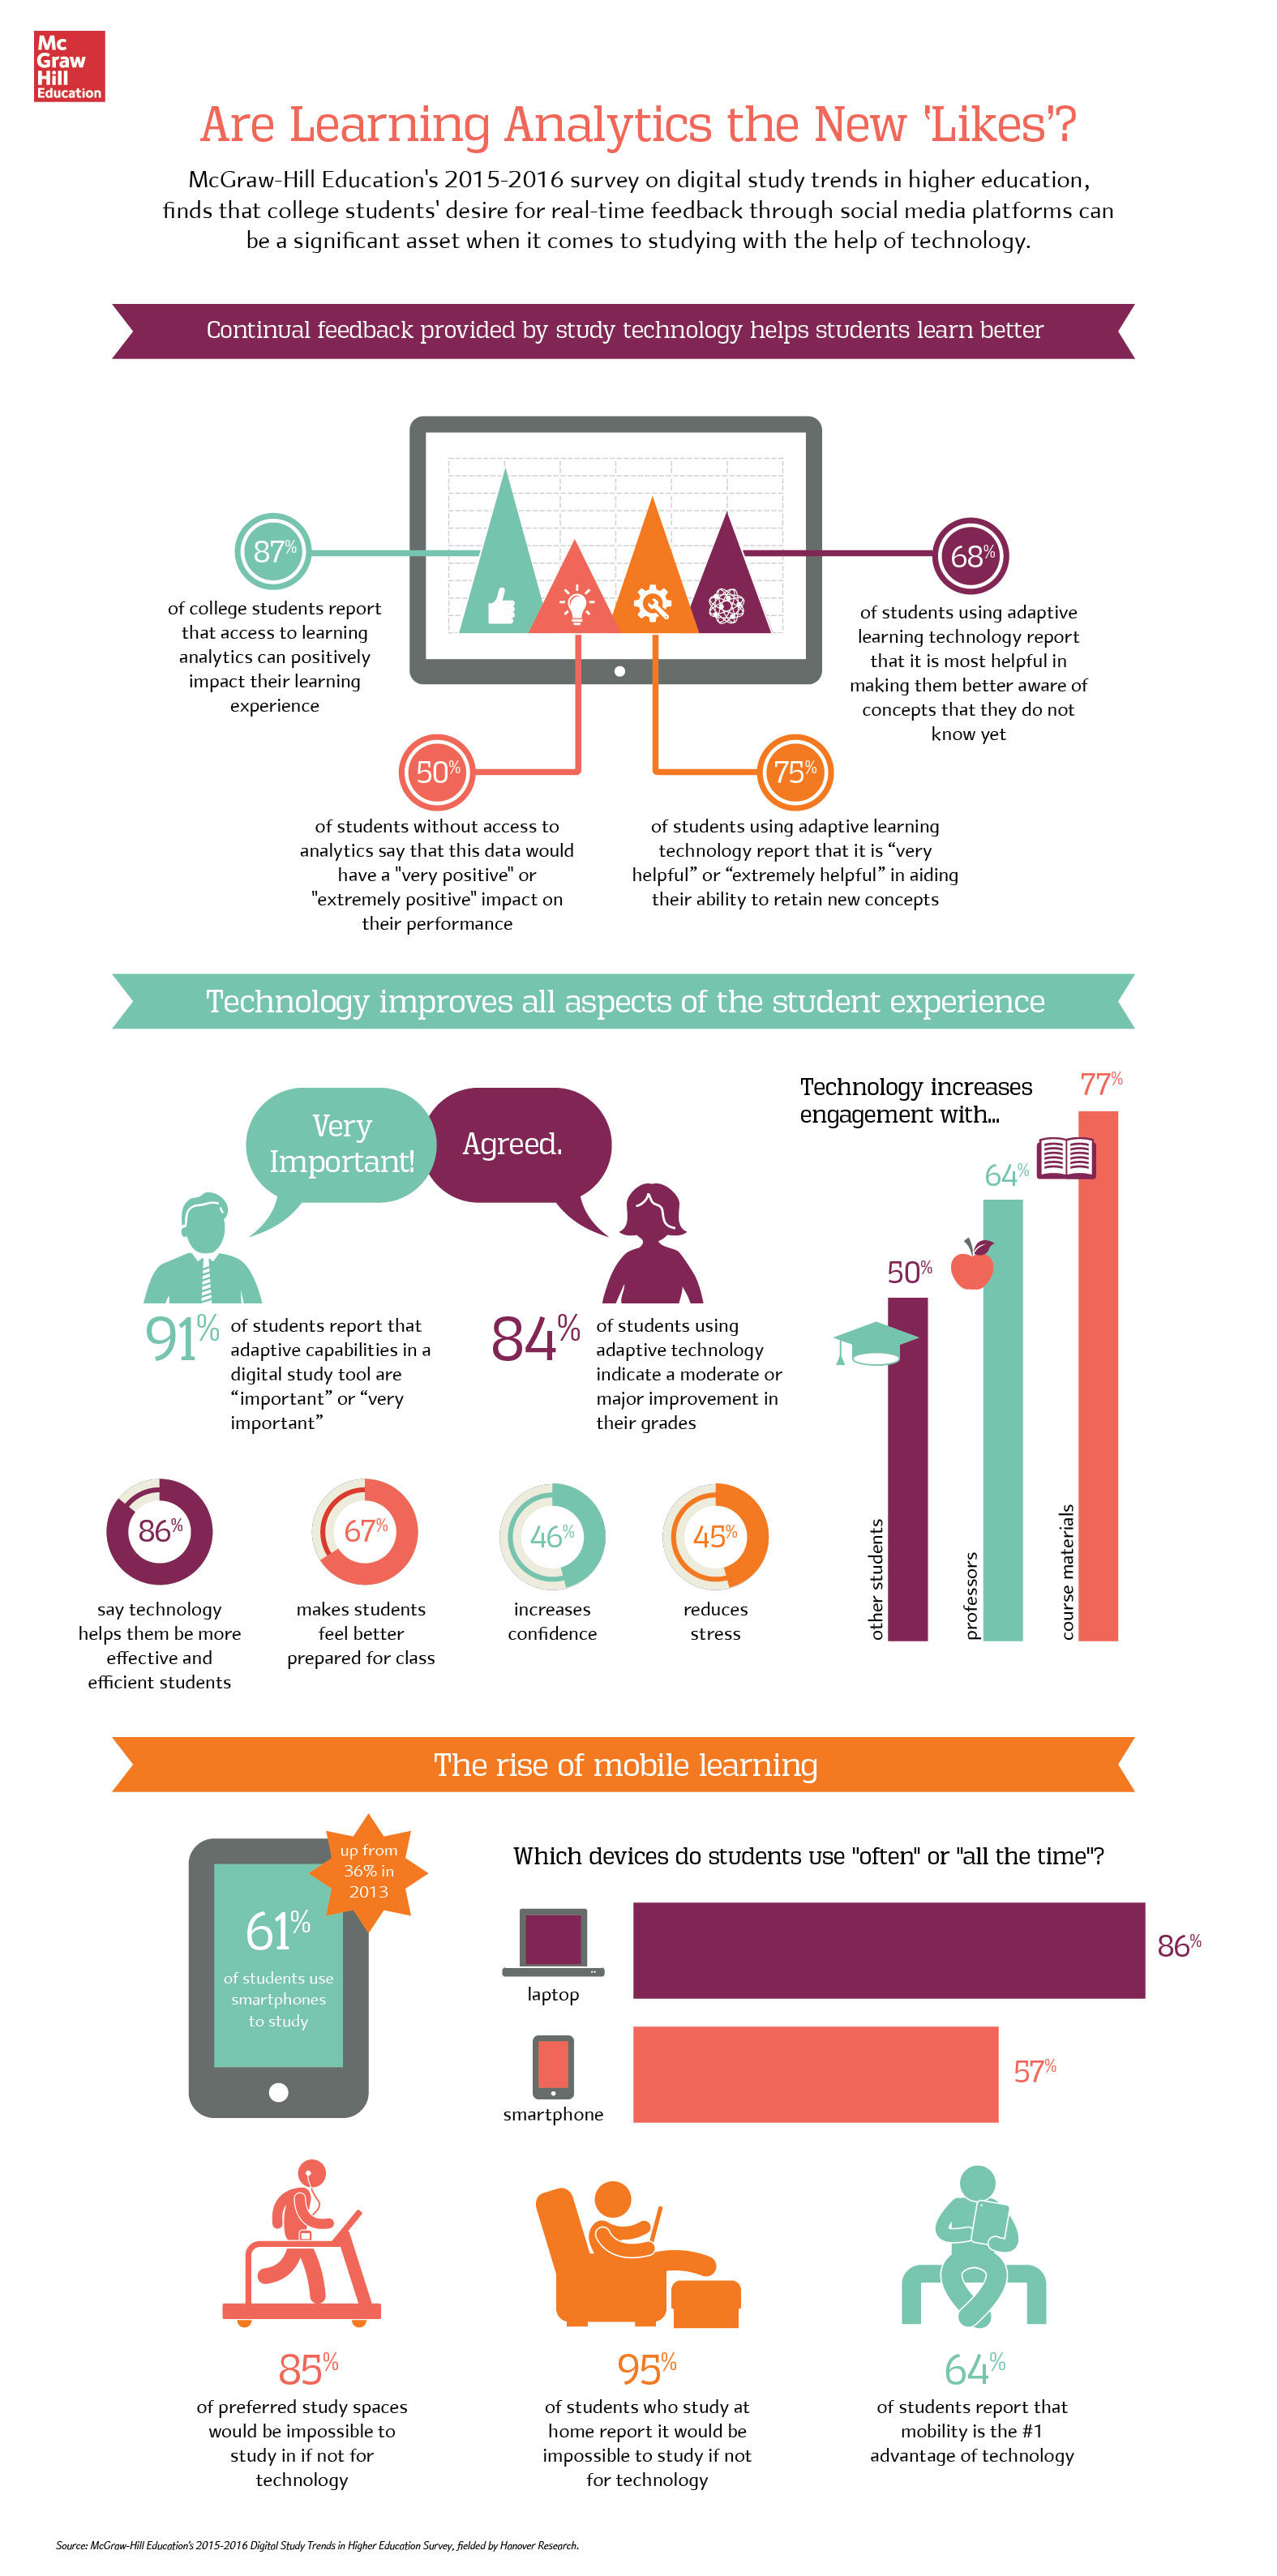 Are Learning Analytics the New "Likes"? infographic